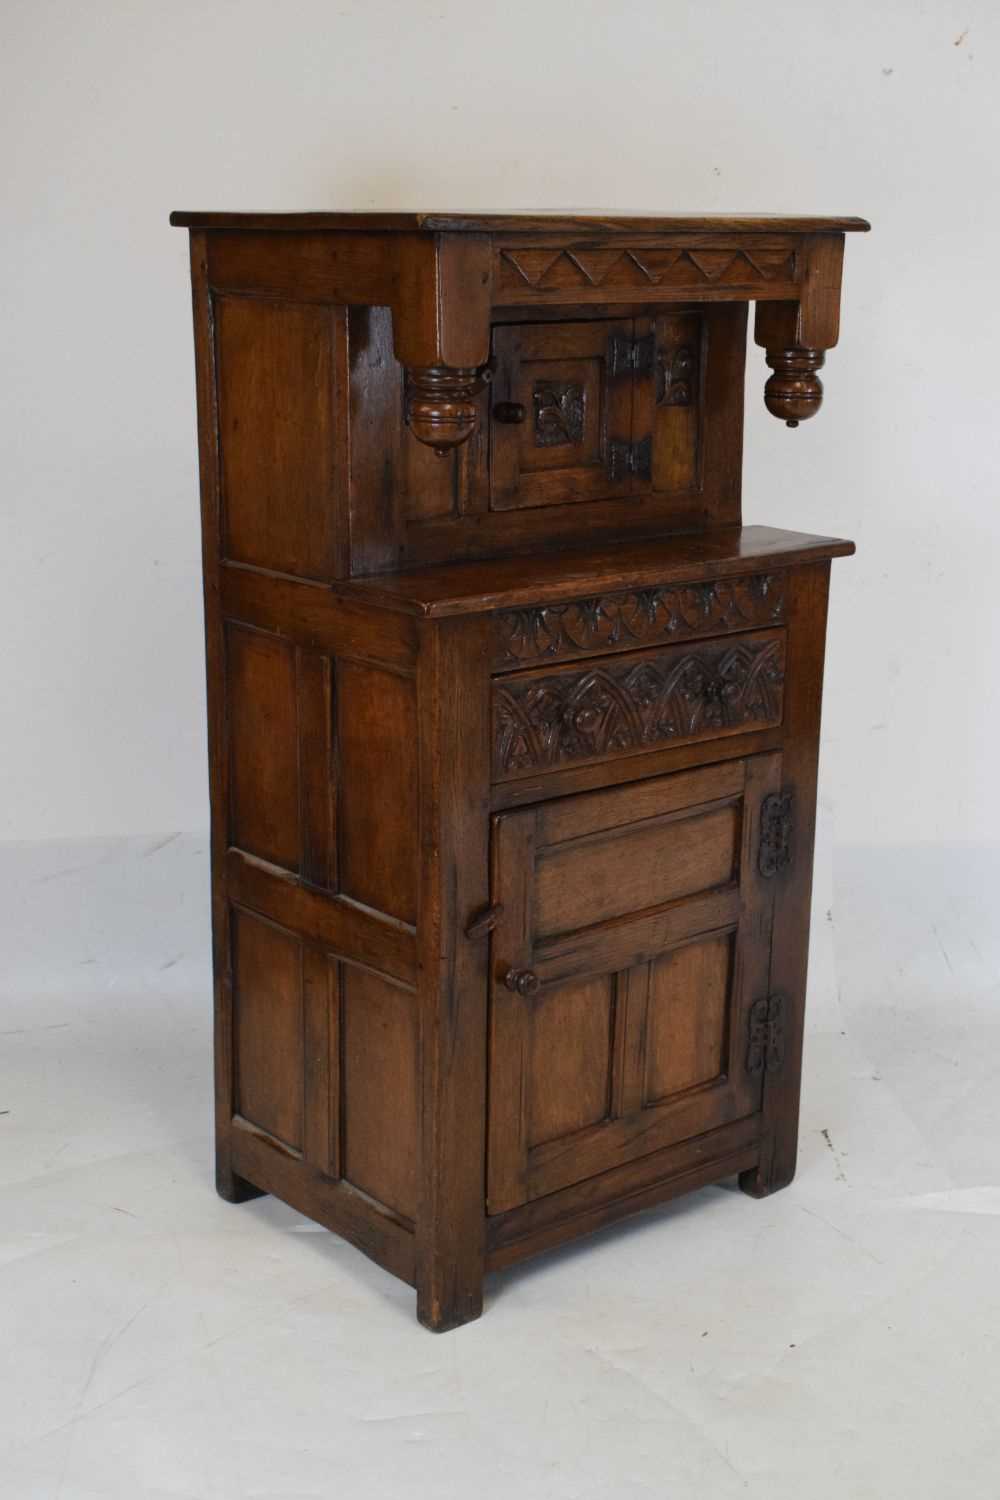 Small old reproduction press or court cupboard - Image 2 of 7